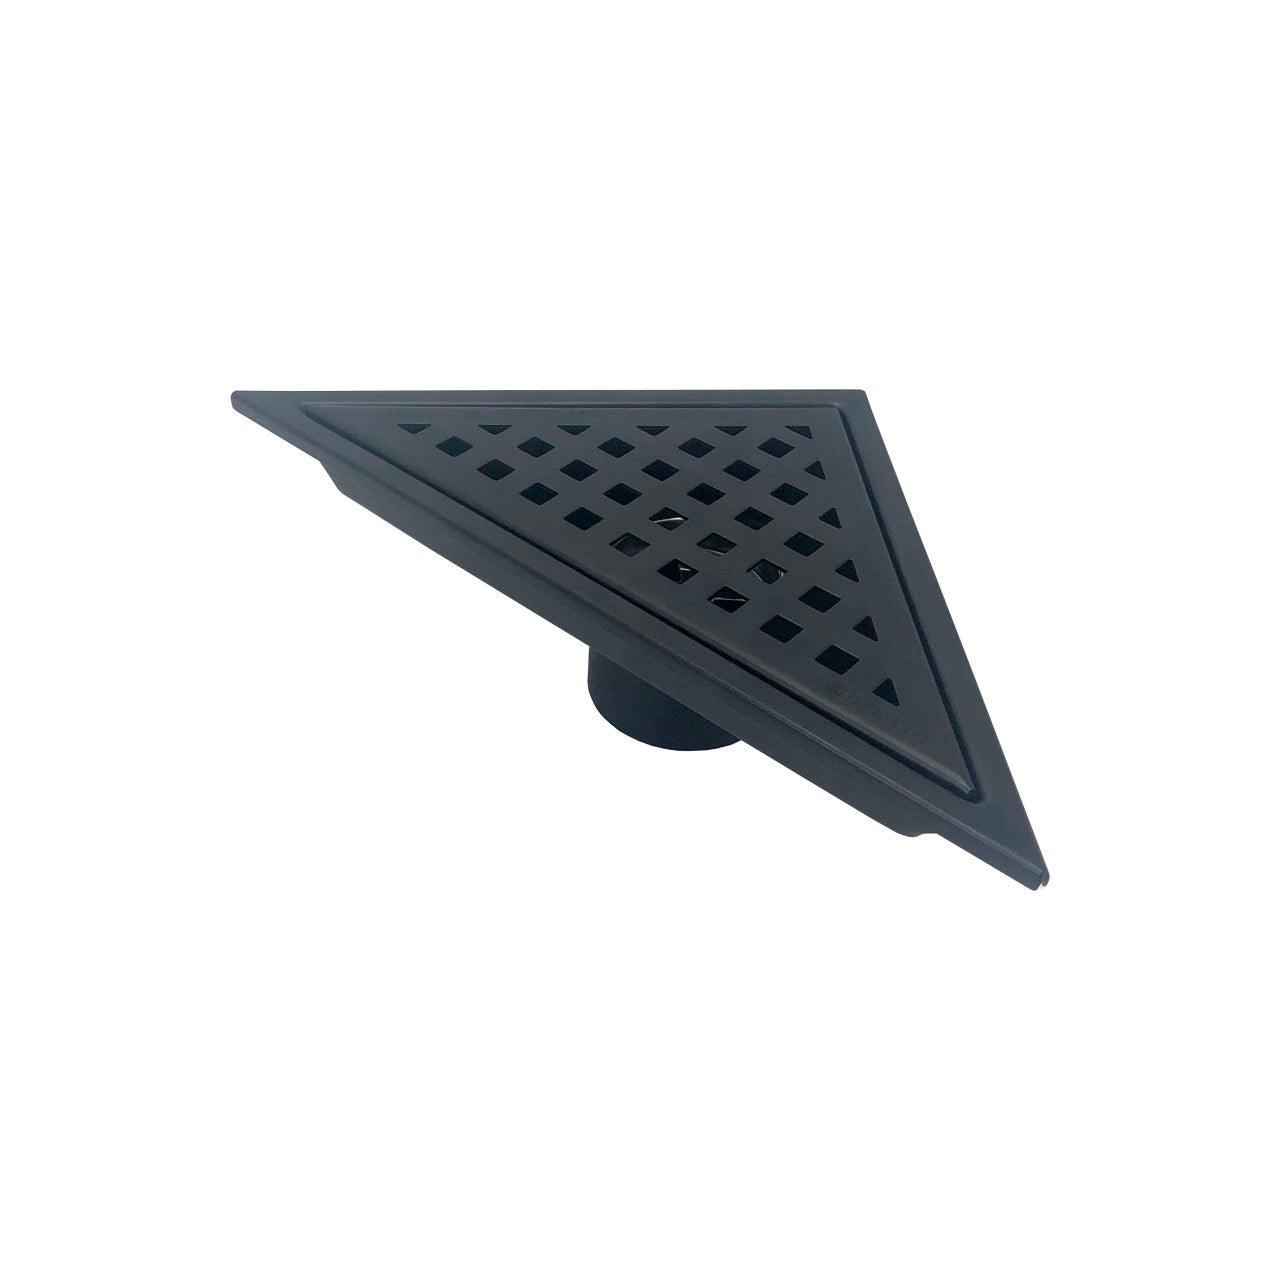 Kube 6.5″ Triangle Stainless Steel Pixel Grate - Hbdepot